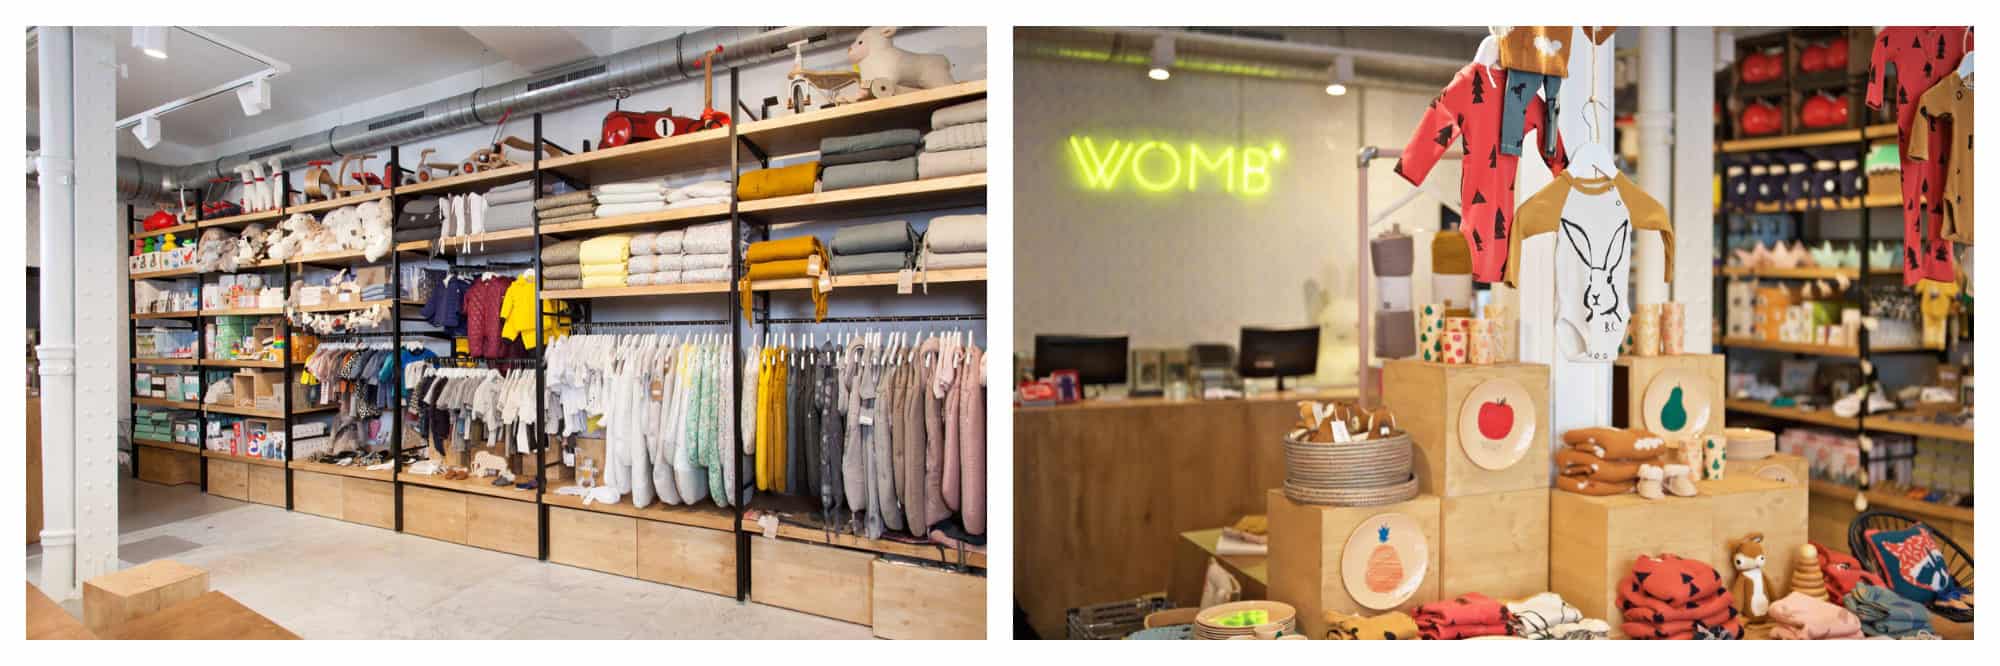 Clothing rails and shelves at Paris kids' store WOMB (left). A display of clothes at WOMB (right).